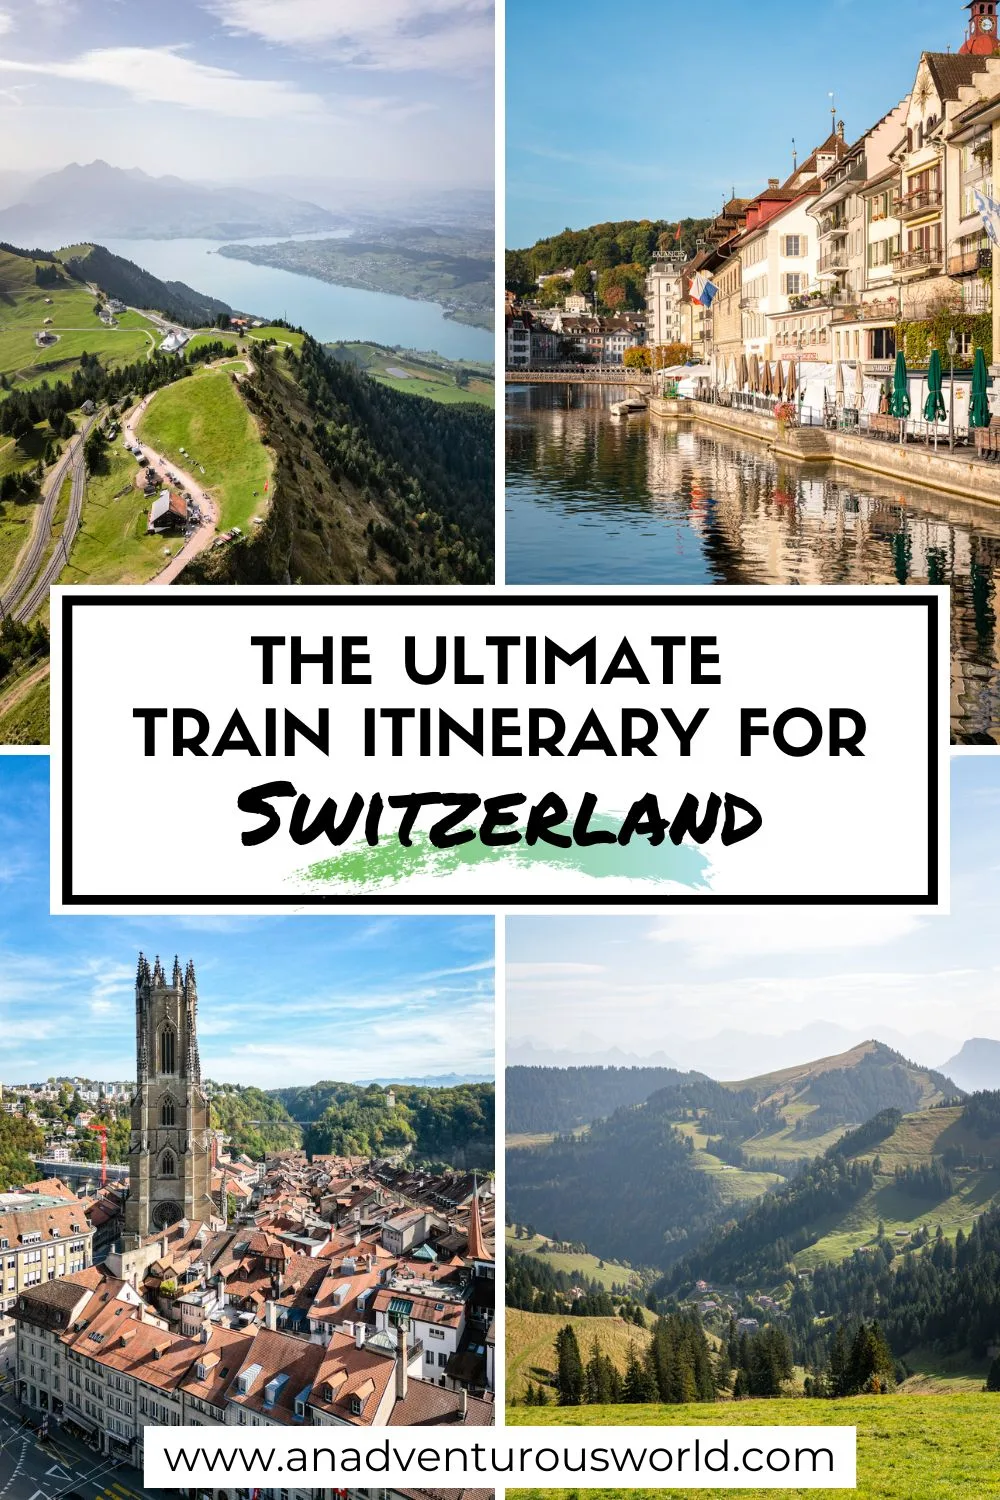 The Ultimate Train Itinerary for Switzerland